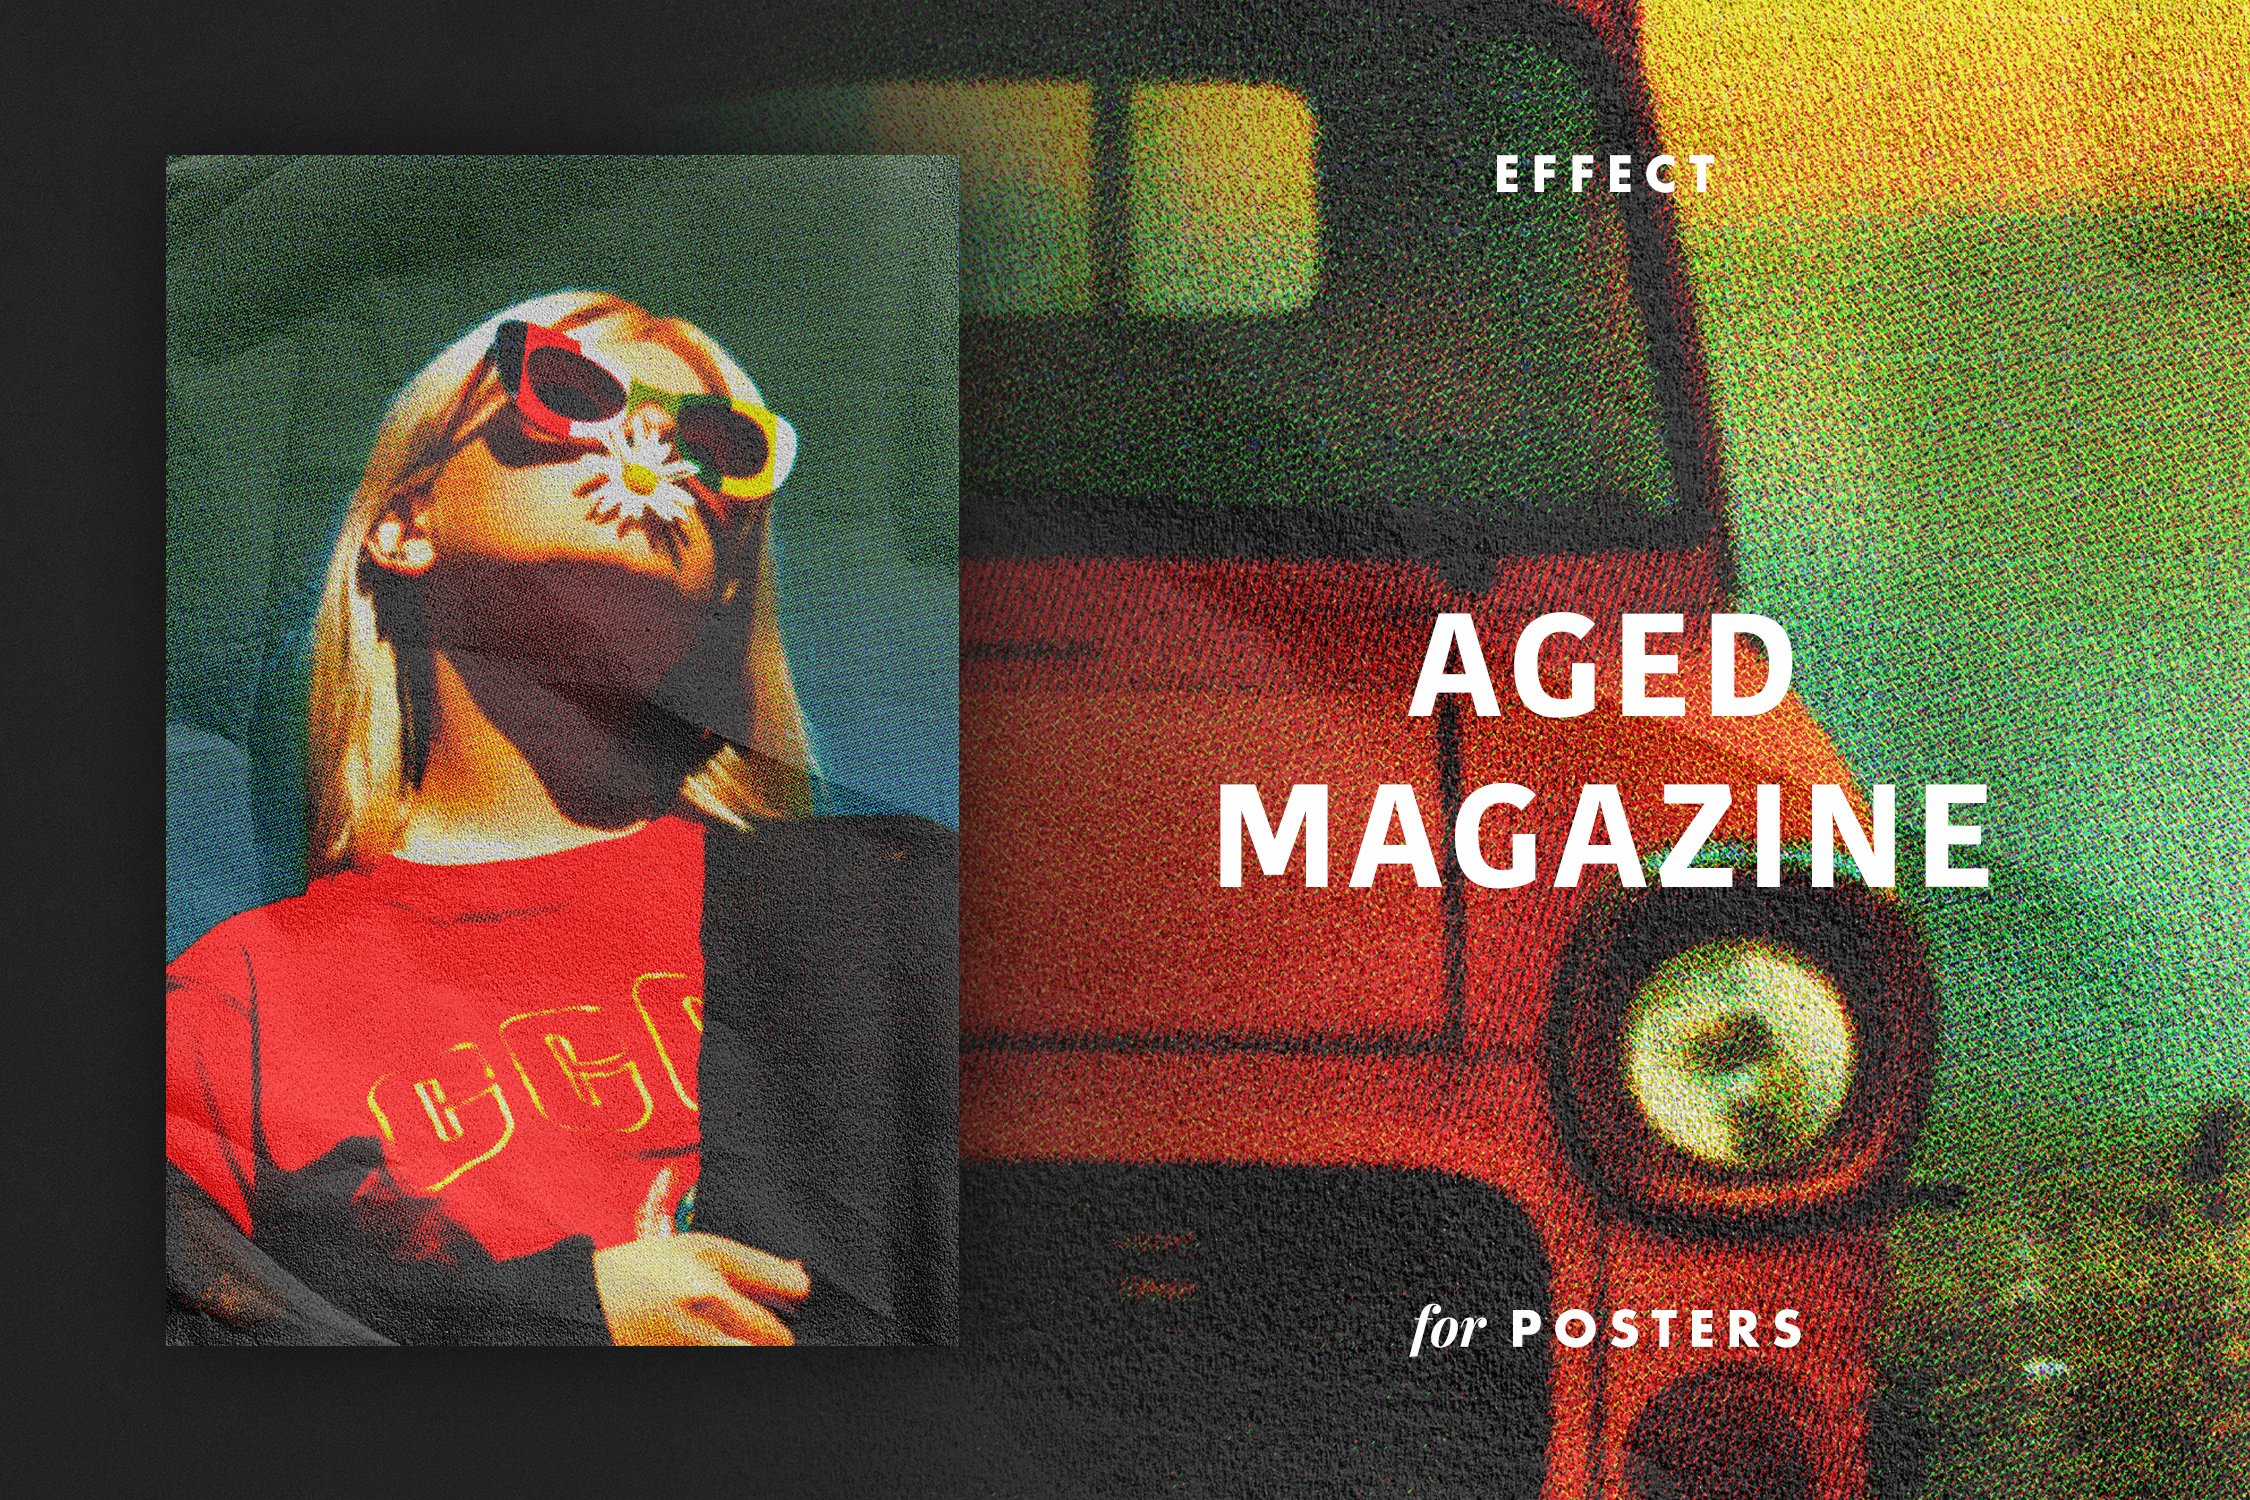 Aged Magazine Effect for Posterscover image.